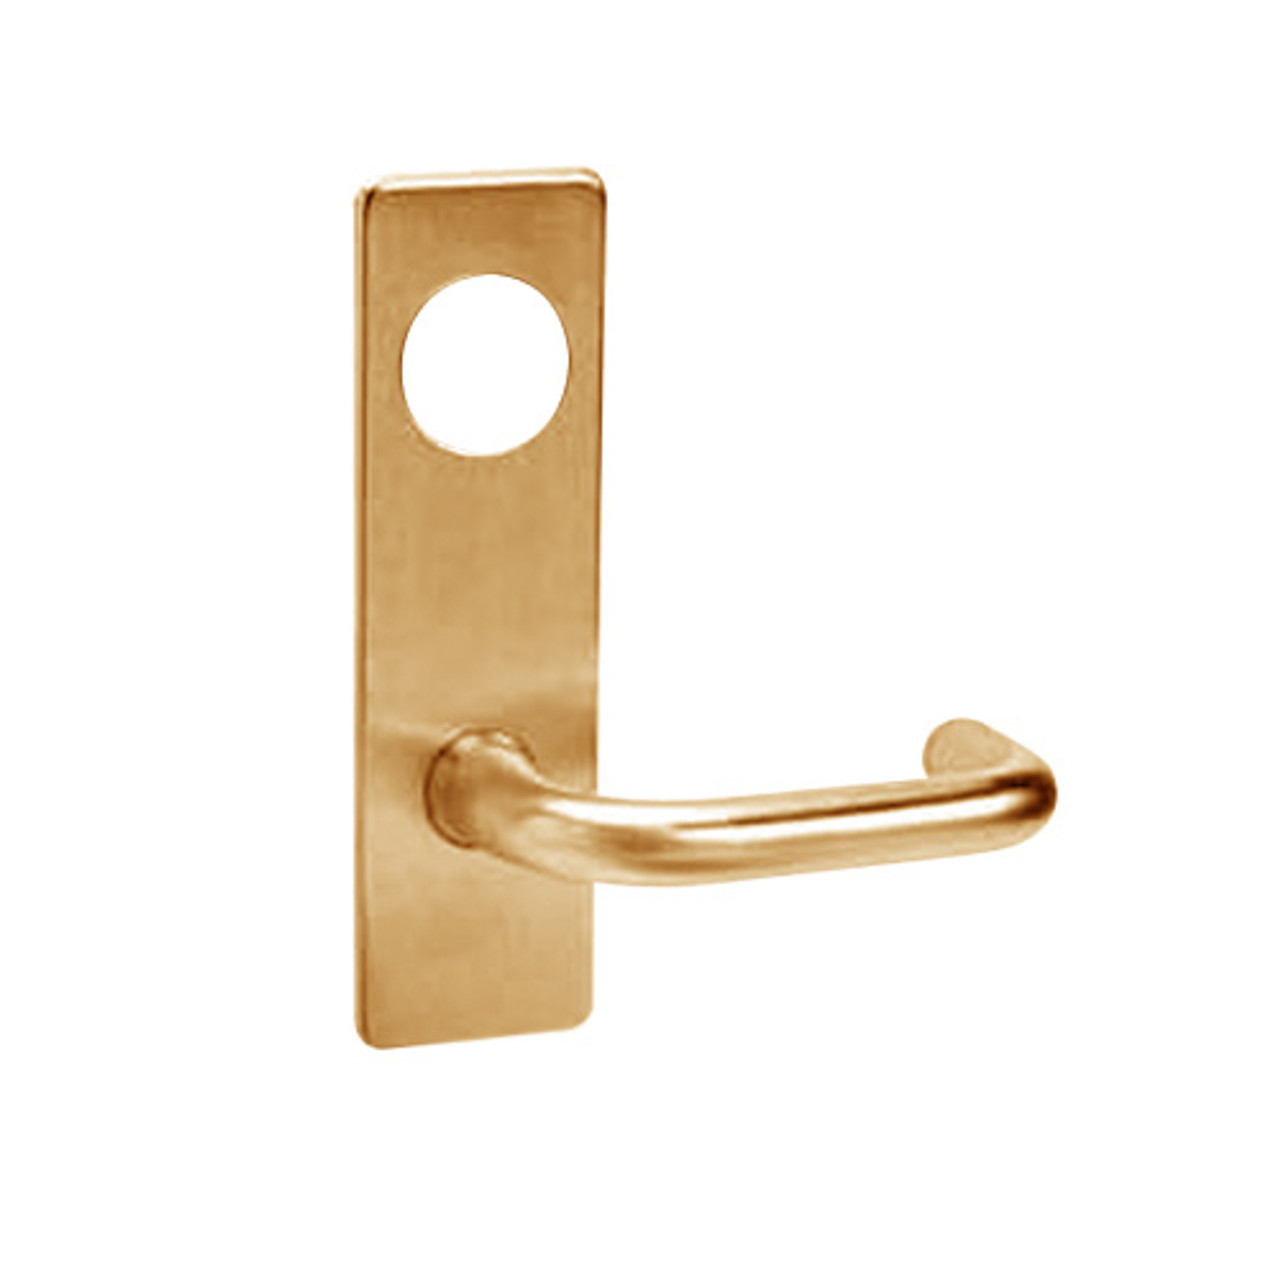 ML2054-LWM-612-CL7 Corbin Russwin ML2000 Series IC 7-Pin Less Core Mortise Entrance Locksets with Lustra Lever in Satin Bronze